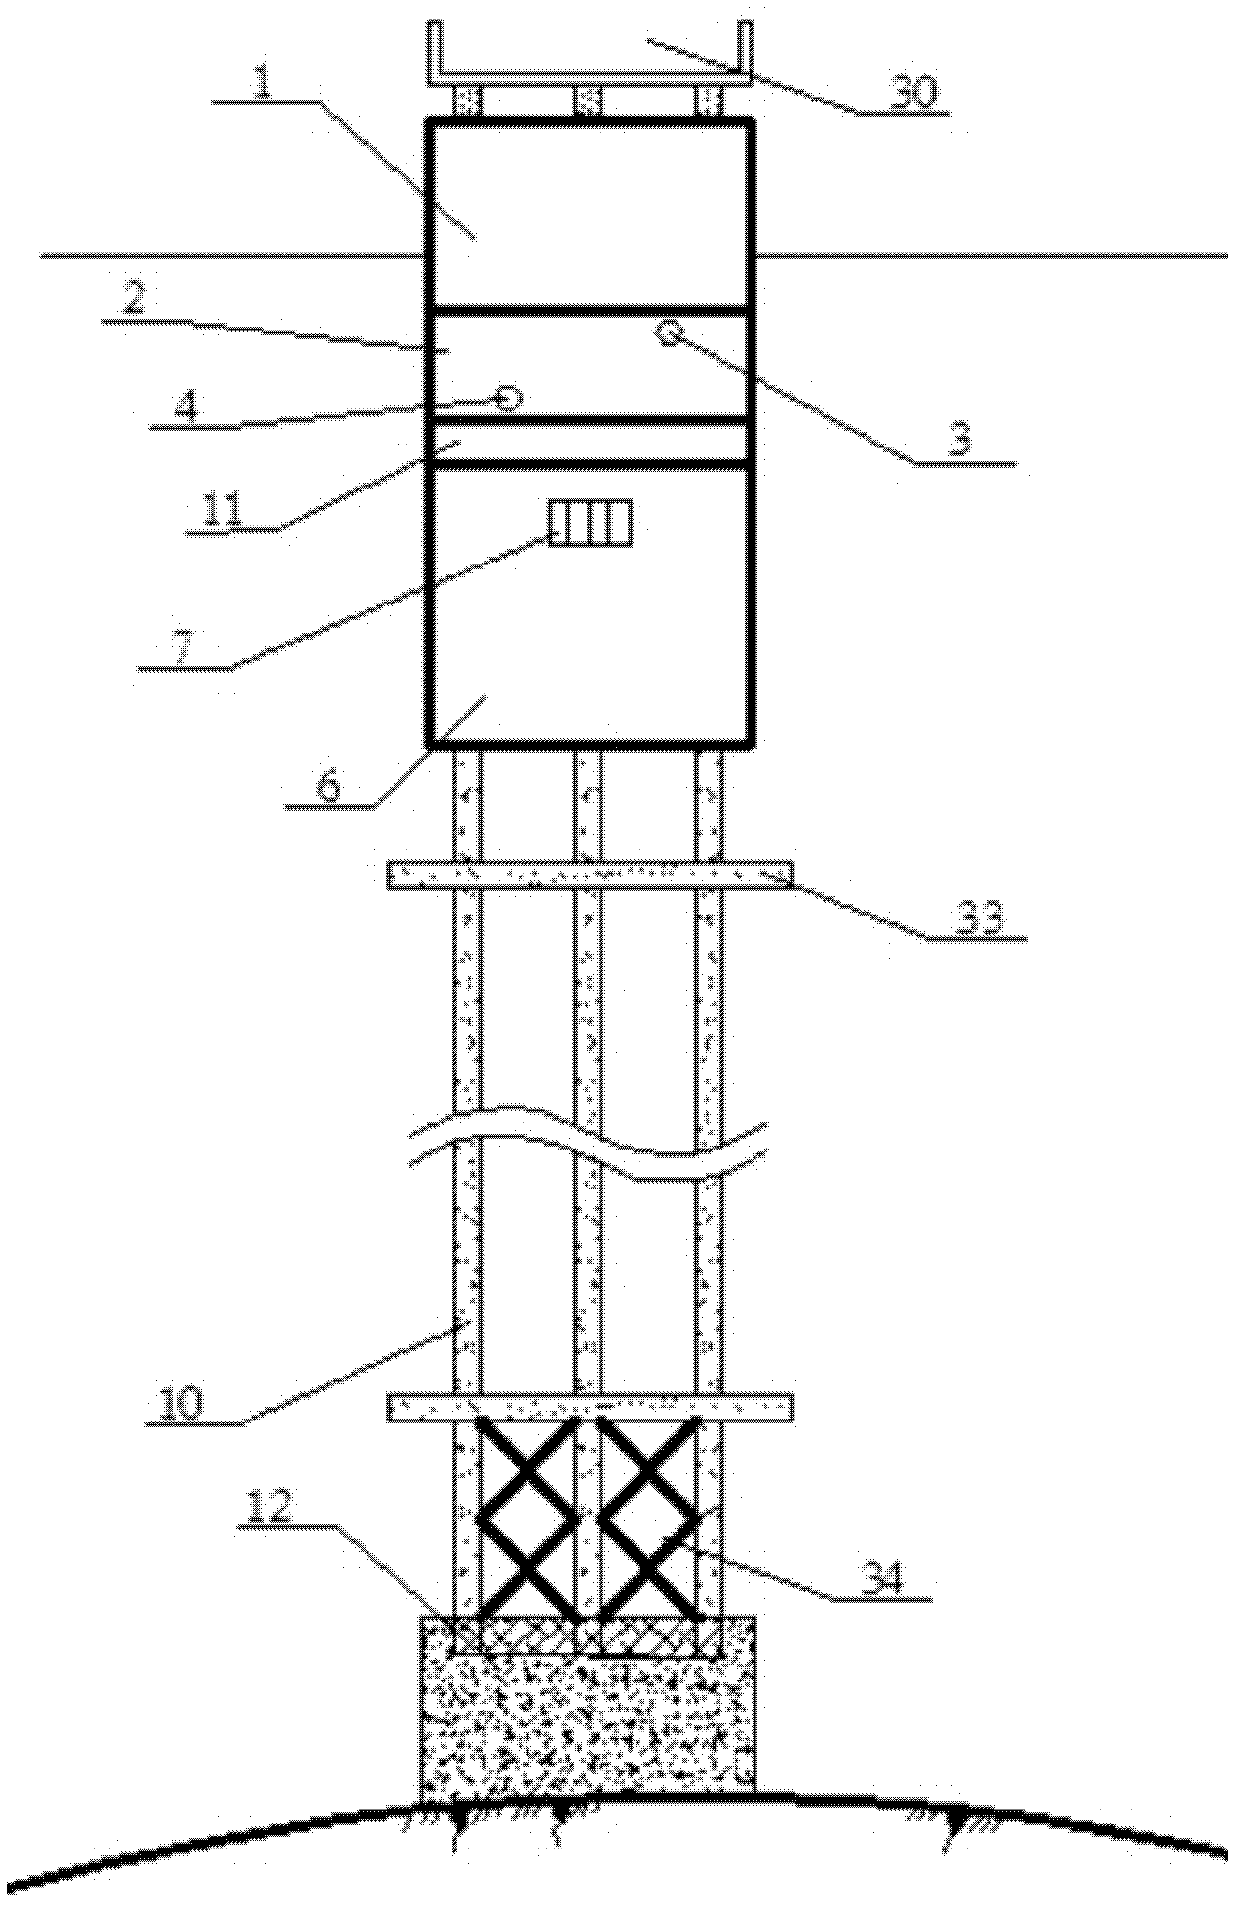 Pre-purification hydraulic, automatic and selective water intake device